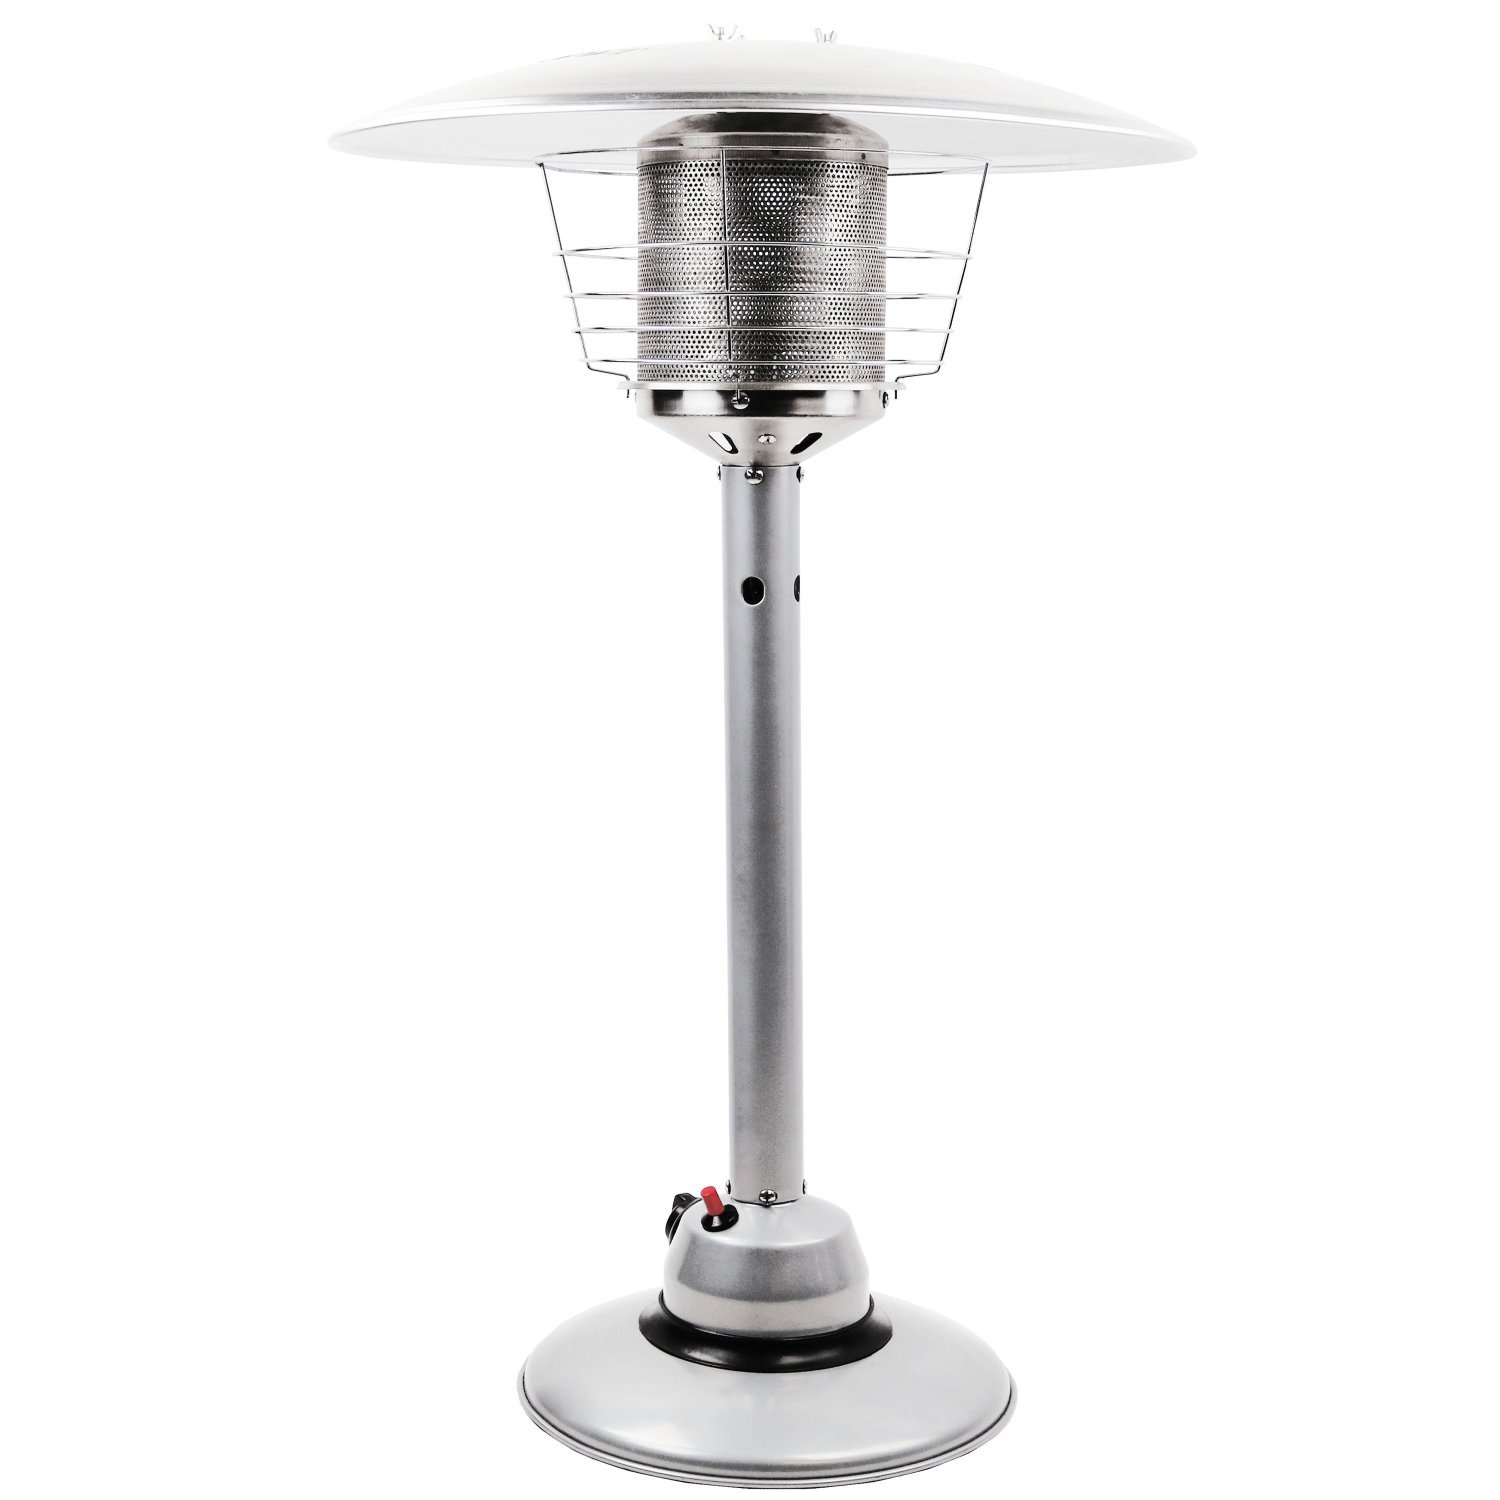 Table Top 4kw Outdoor Gas Patio Heater, Table Top Patio Heater Electric In Stock